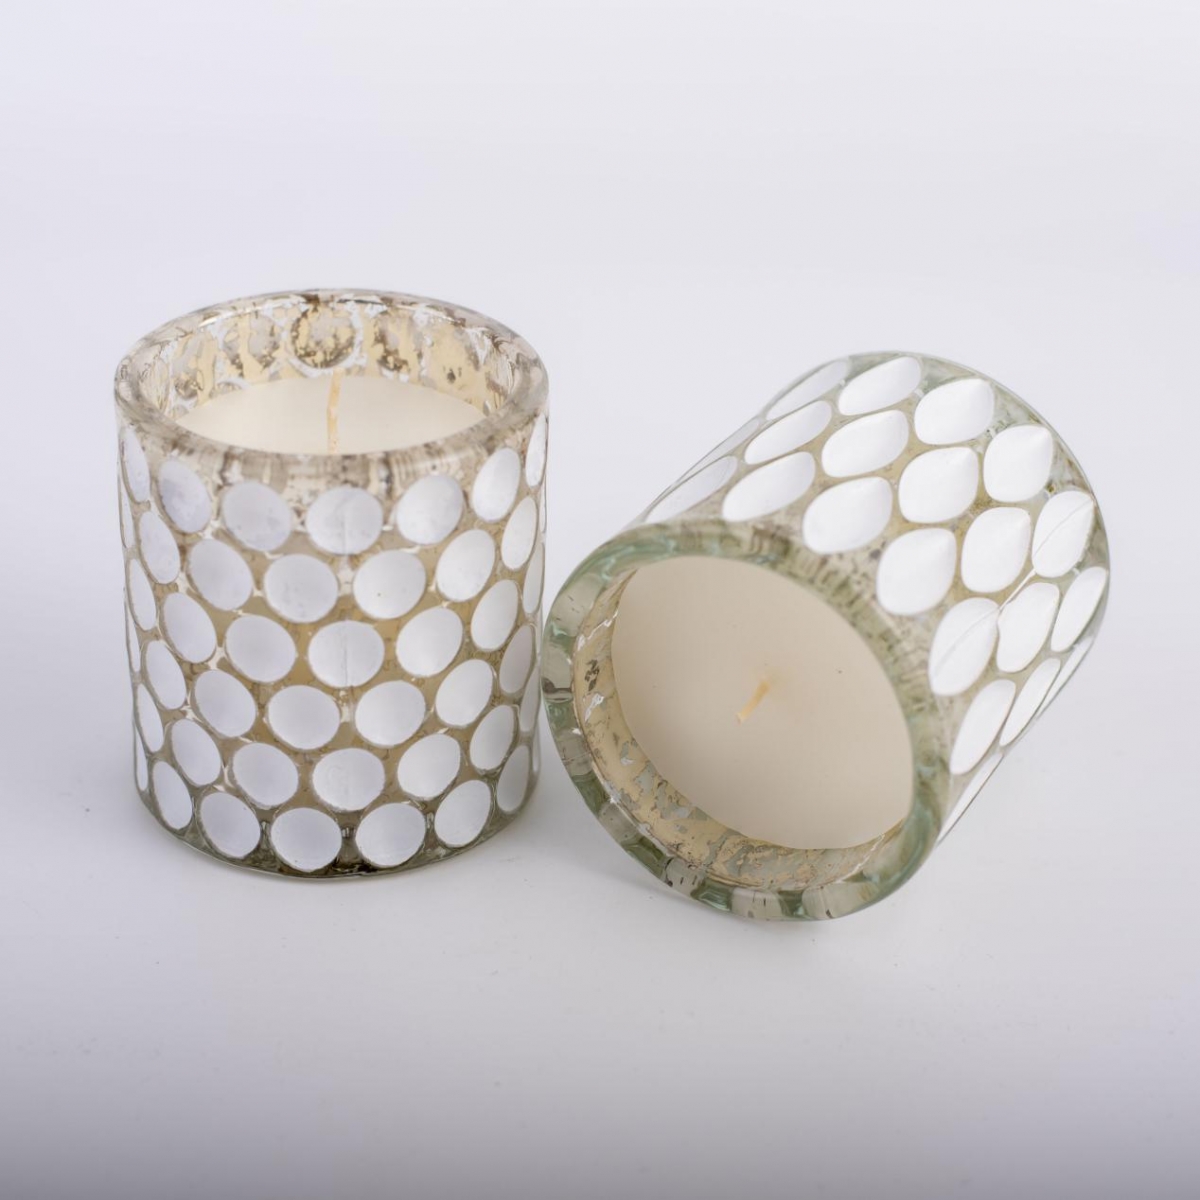 Soy Candles -Natural Essential Oils ,Scented Candles In White Glass Jar ,Polishing Geometric Leaf  ,Aromatherapy Candles ,China Factory ,Price-HOWCANDLE-Candles,Scented Candles,Aromatherapy Candles,Soy Candles,Vegan Candles,Jar Candles,Pillar Candles,Candle Gift Sets,Essential Oils,Reed Diffuser,Candle Holder,